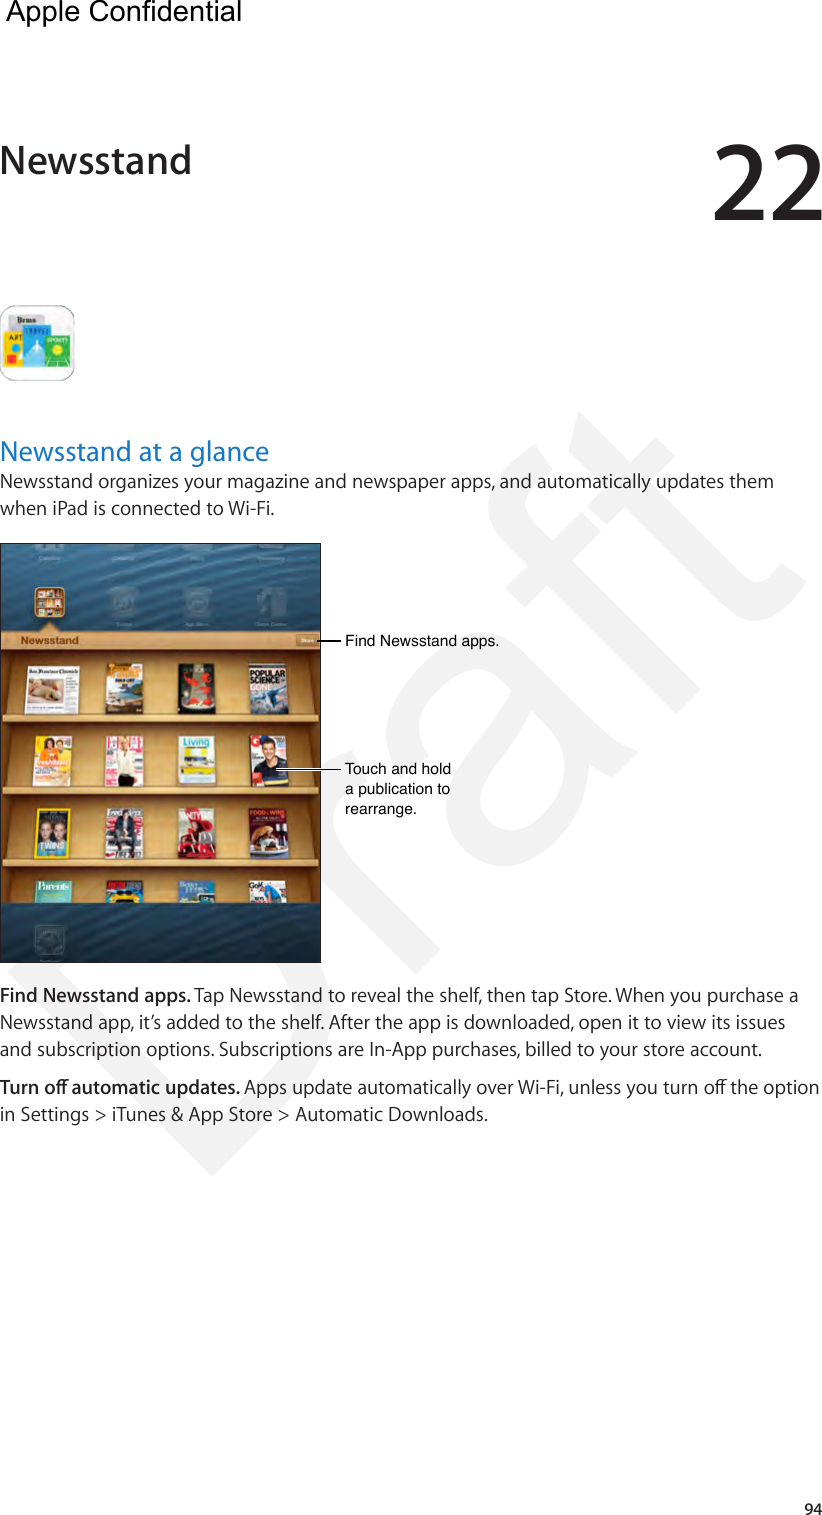 2294Newsstand at a glanceNewsstand organizes your magazine and newspaper apps, and automatically updates them when iPad is connected to Wi-Fi.Find Newsstand apps.Find Newsstand apps.Touch and hold a publication to rearrange.Touch and hold a publication to rearrange.Find Newsstand apps. Tap Newsstand to reveal the shelf, then tap Store. When you purchase a Newsstand app, it’s added to the shelf. After the app is downloaded, open it to view its issues and subscription options. Subscriptions are In-App purchases, billed to your store account.Turn o automatic updates. Apps update automatically over Wi-Fi, unless you turn o the option in Settings &gt; iTunes &amp; App Store &gt; Automatic Downloads.Newsstand  Apple Confidential Draft